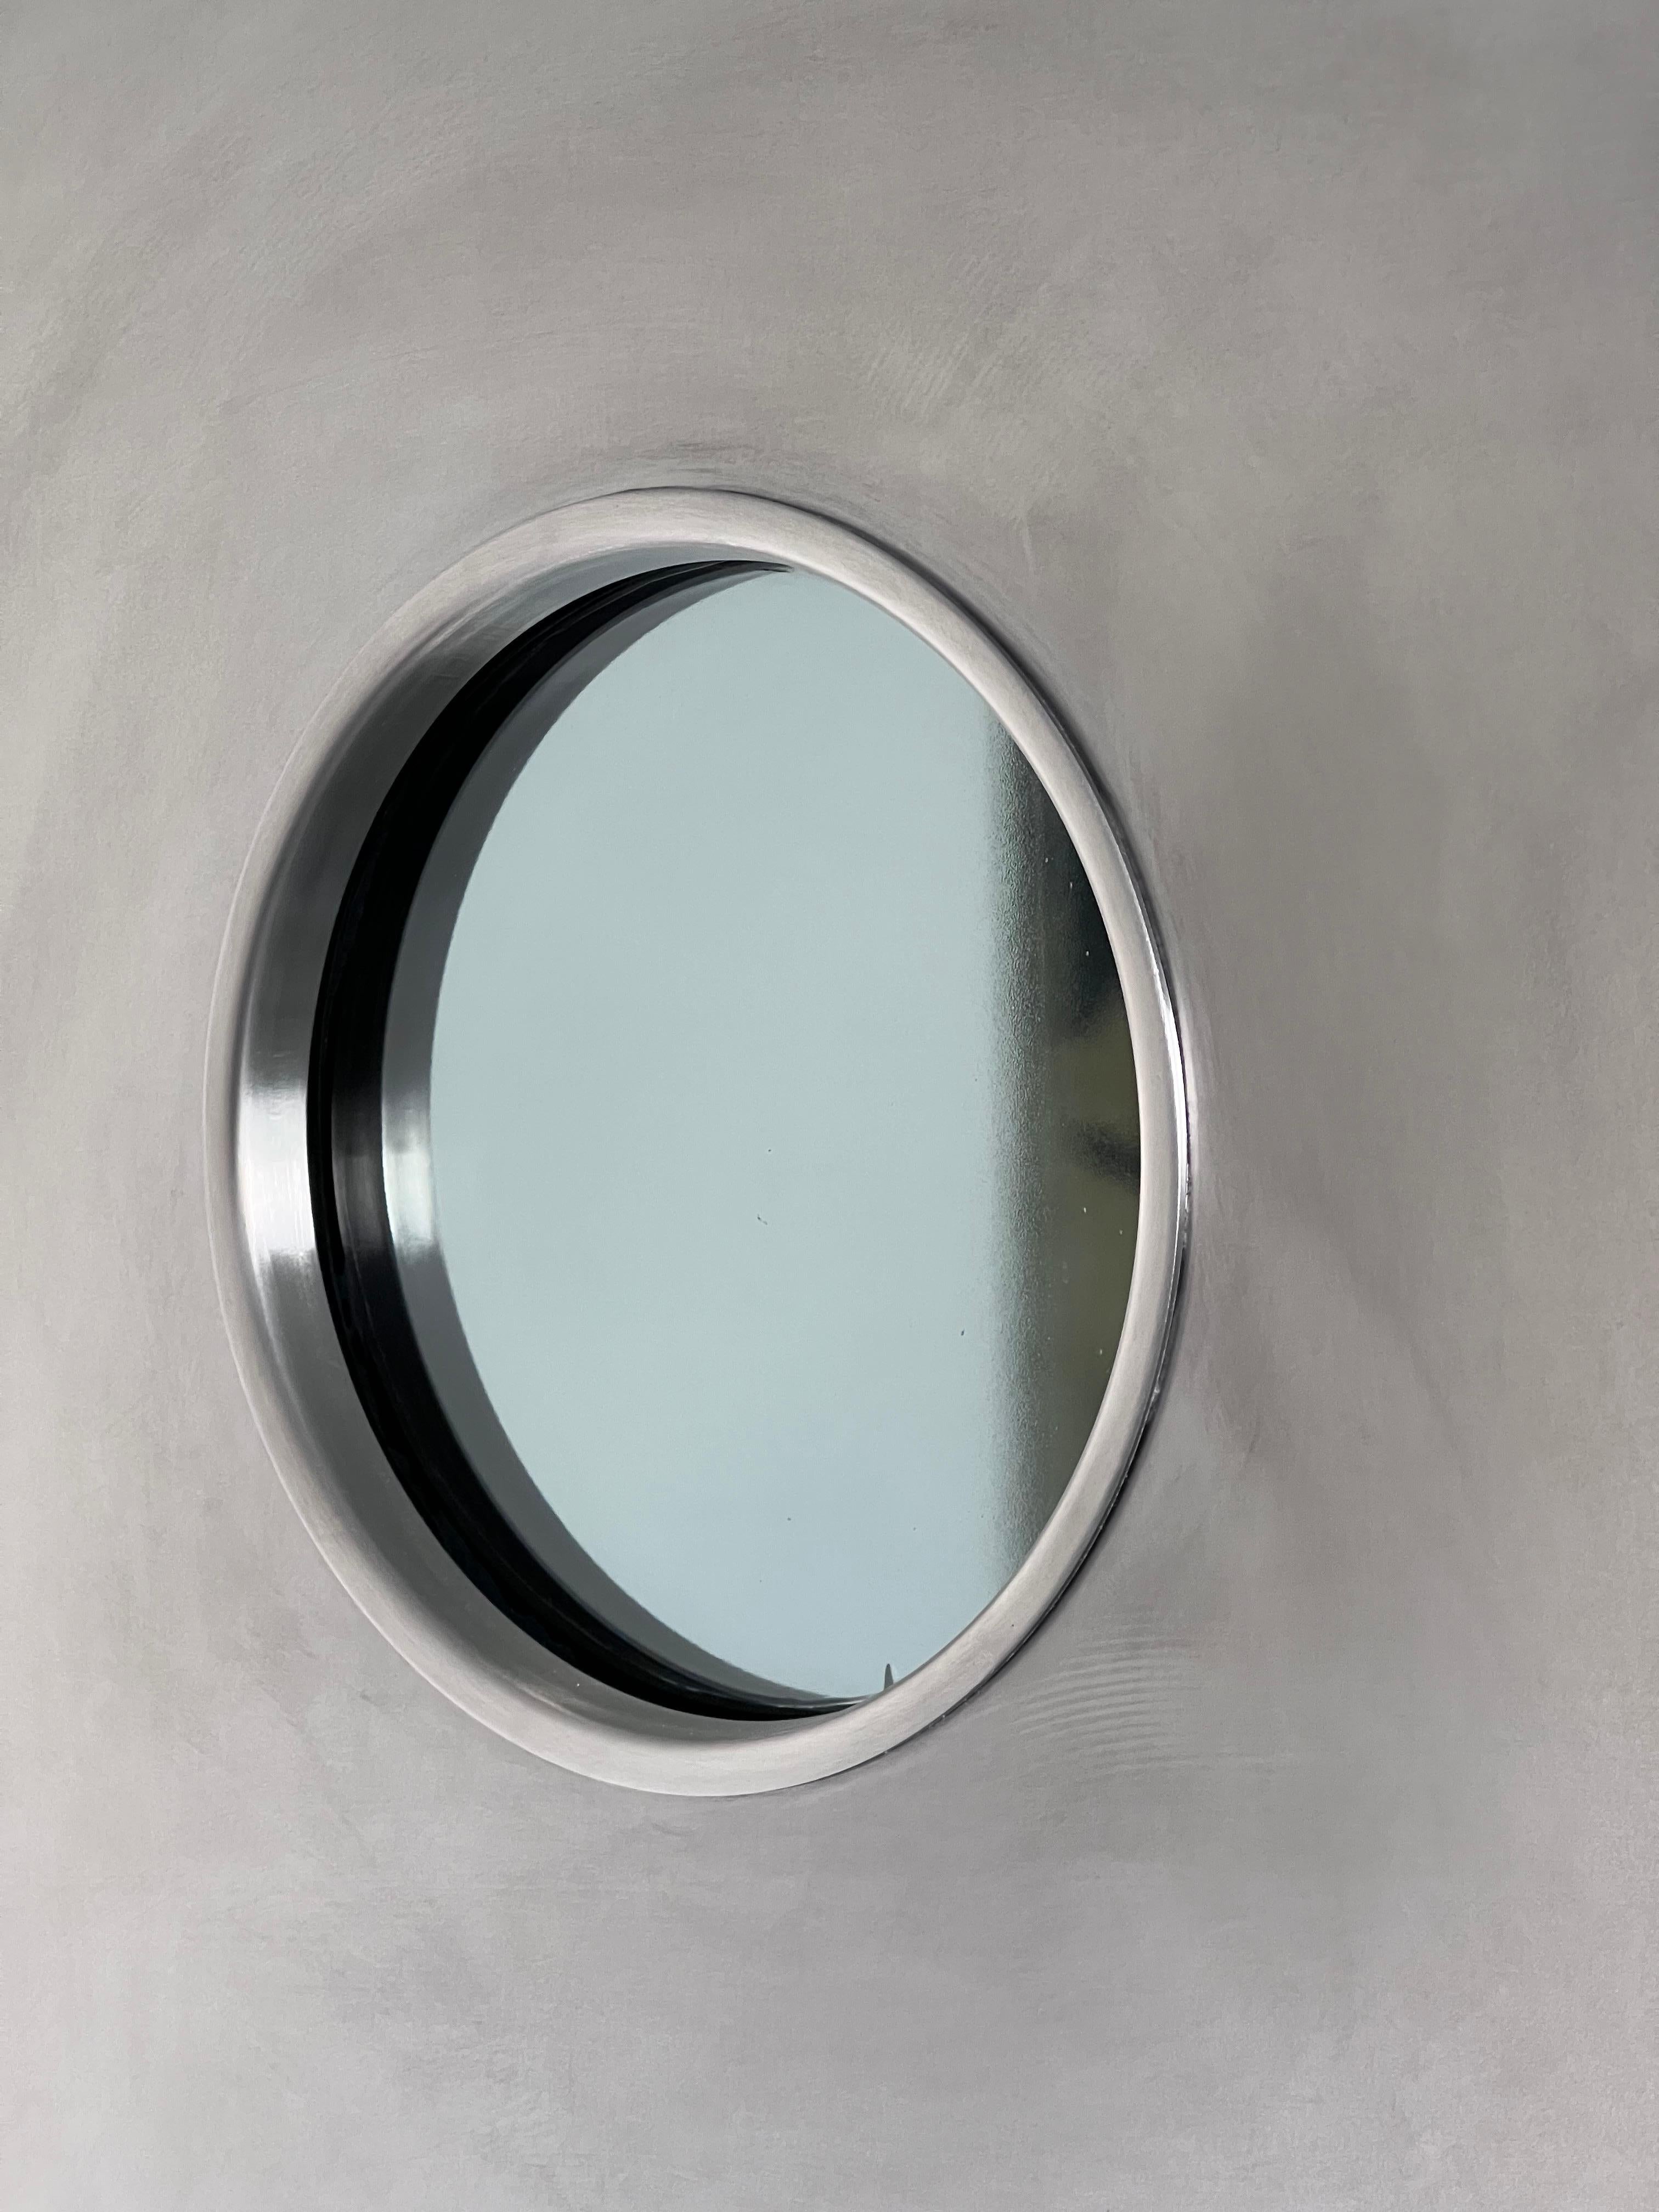 Italian Contemporary custom made Spinzi stainless steel metal door with round portholes For Sale